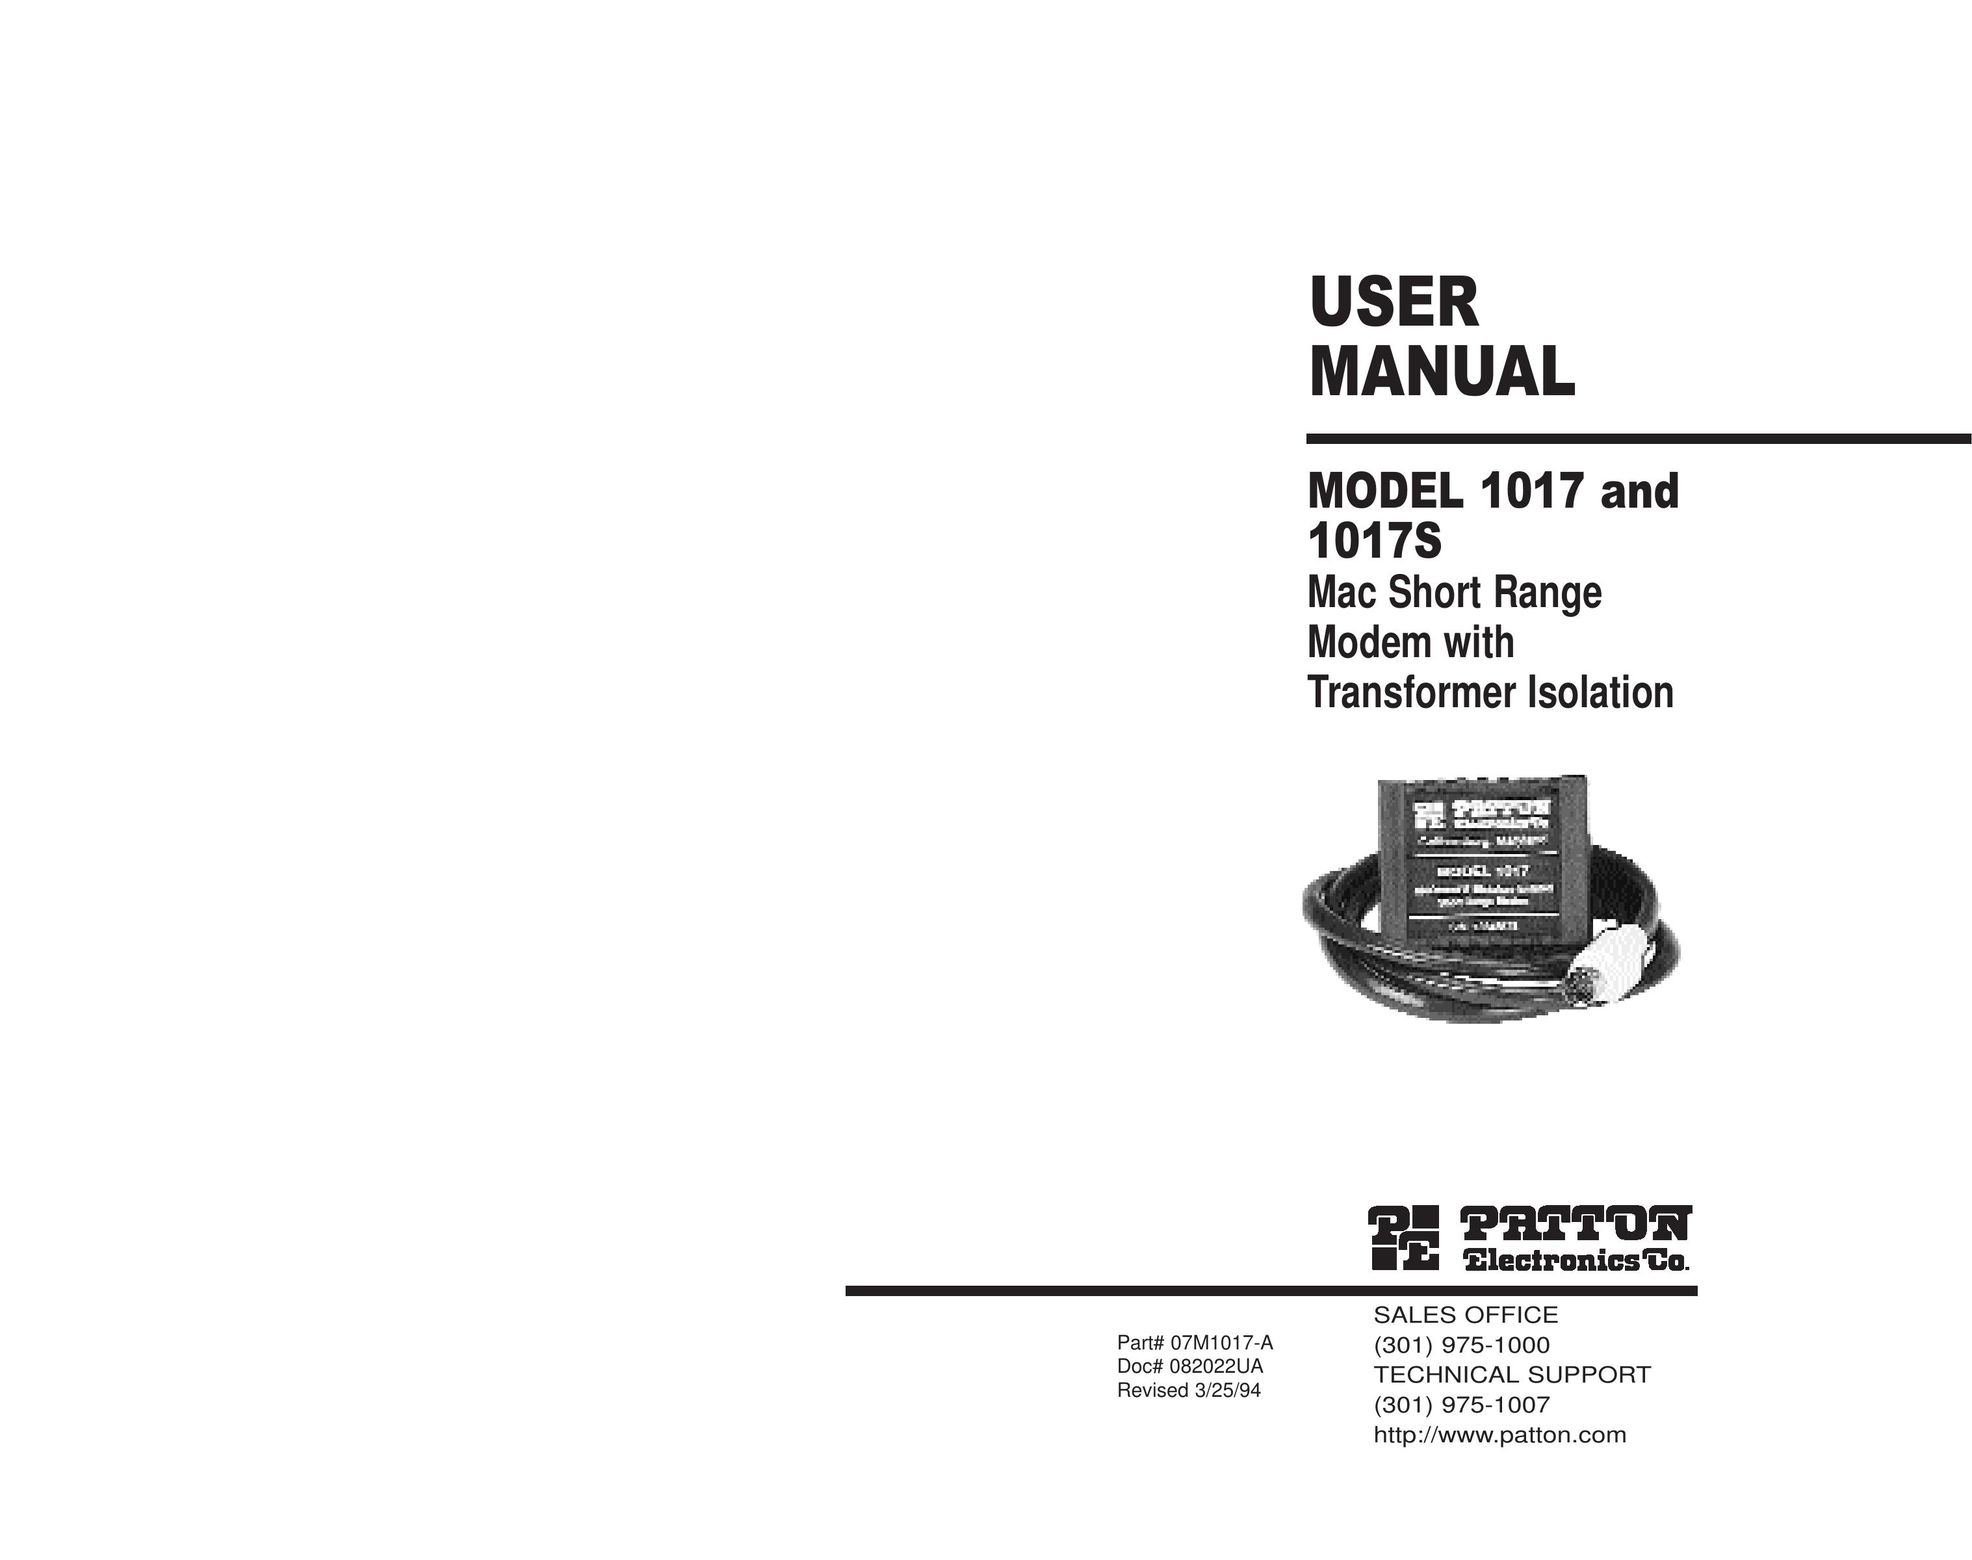 Patton electronic 1017 Network Card User Manual